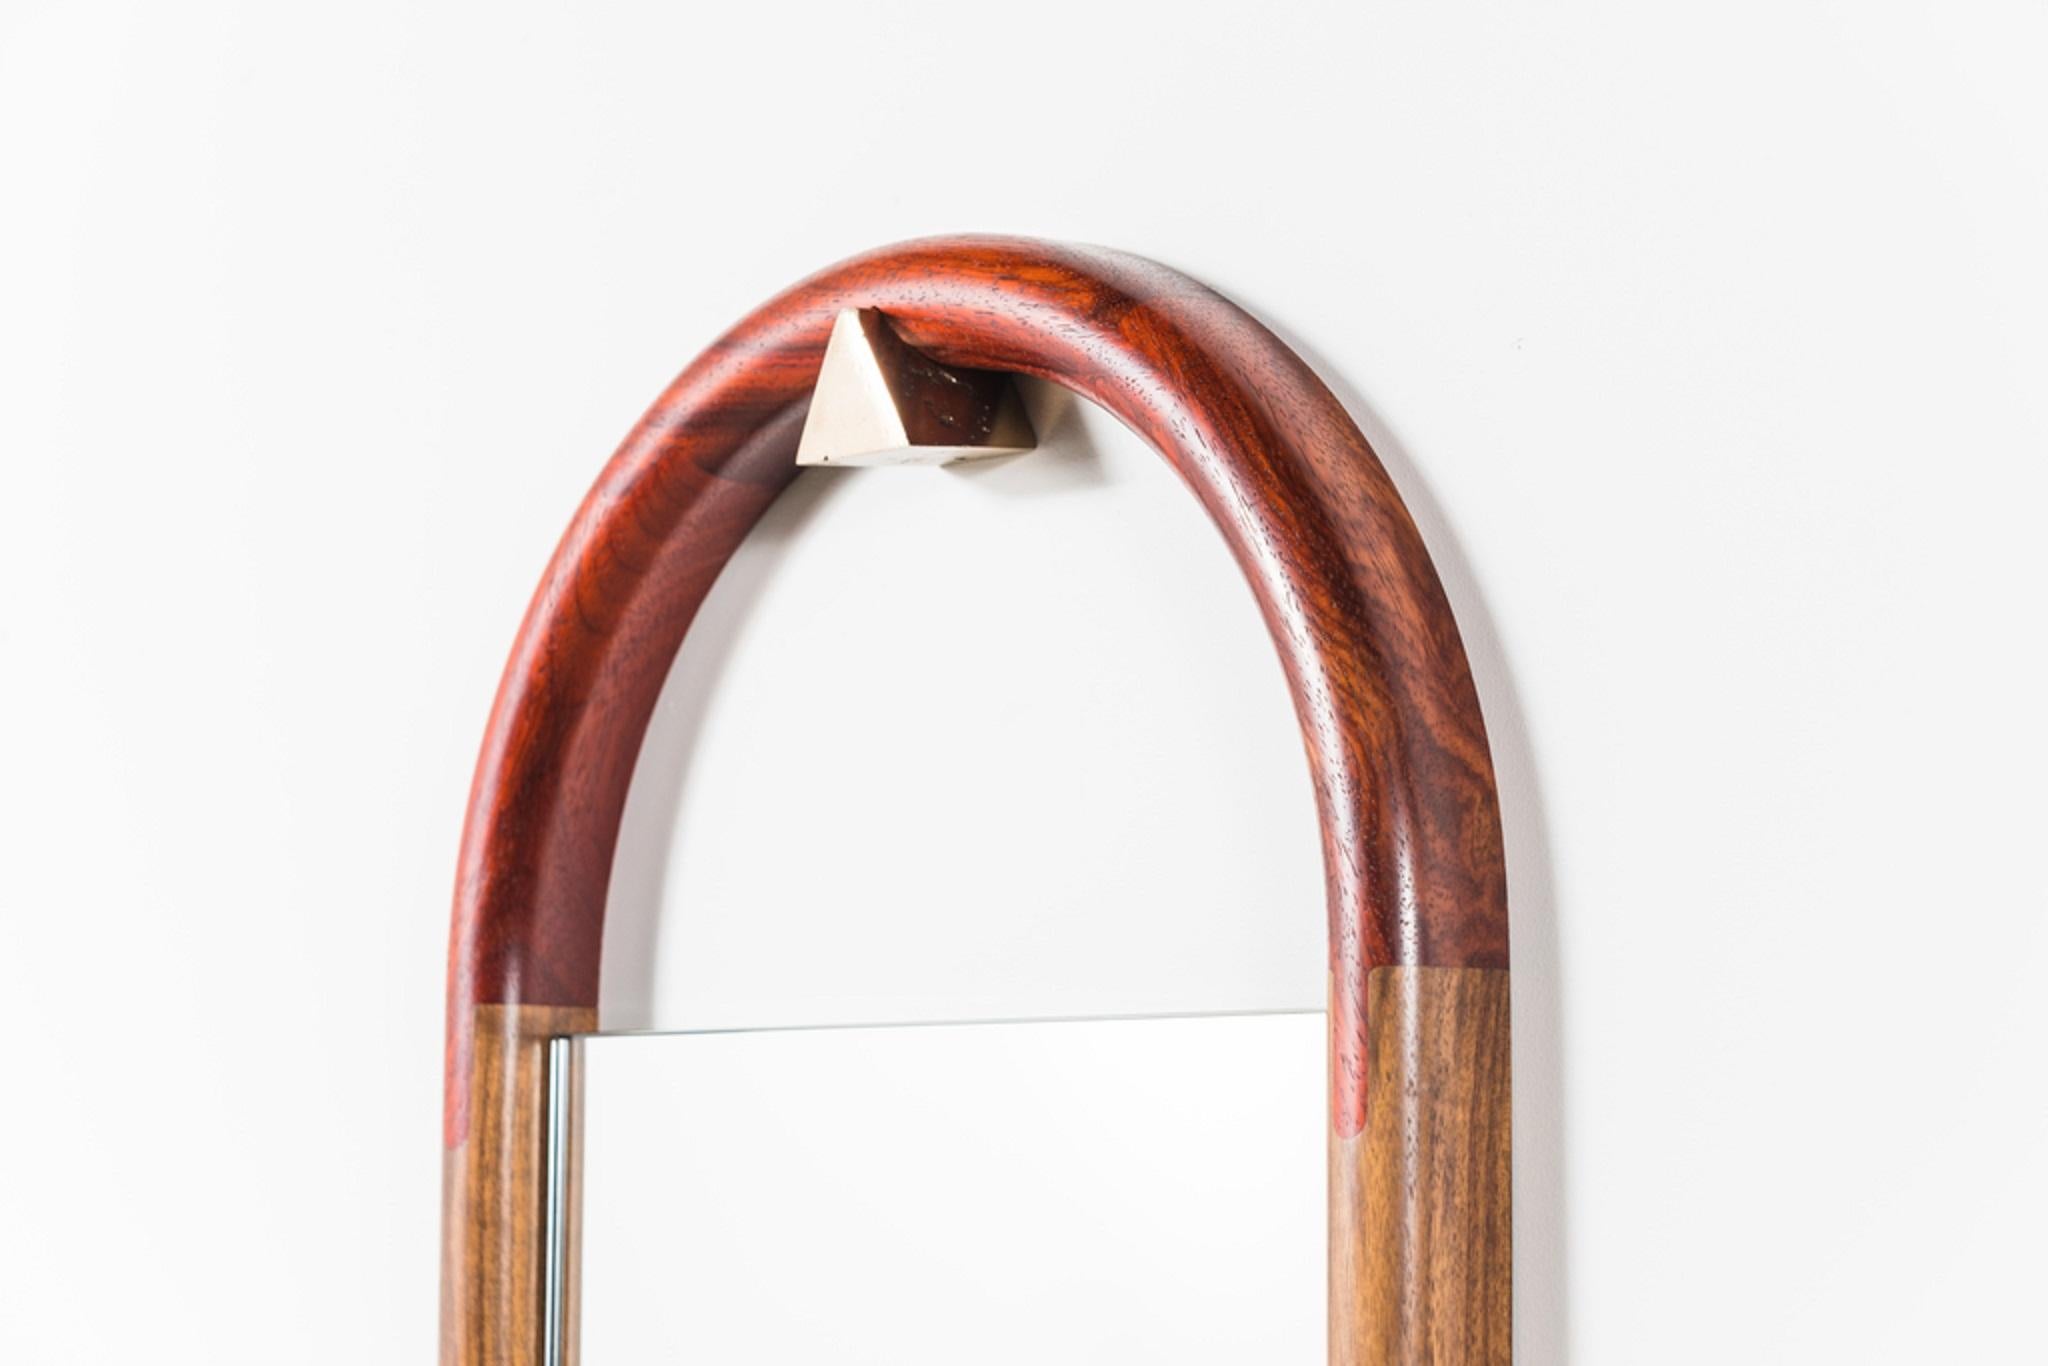 American Tall Halo Mirror, Birnam Wood Studio, Represented by Tuleste Factory For Sale